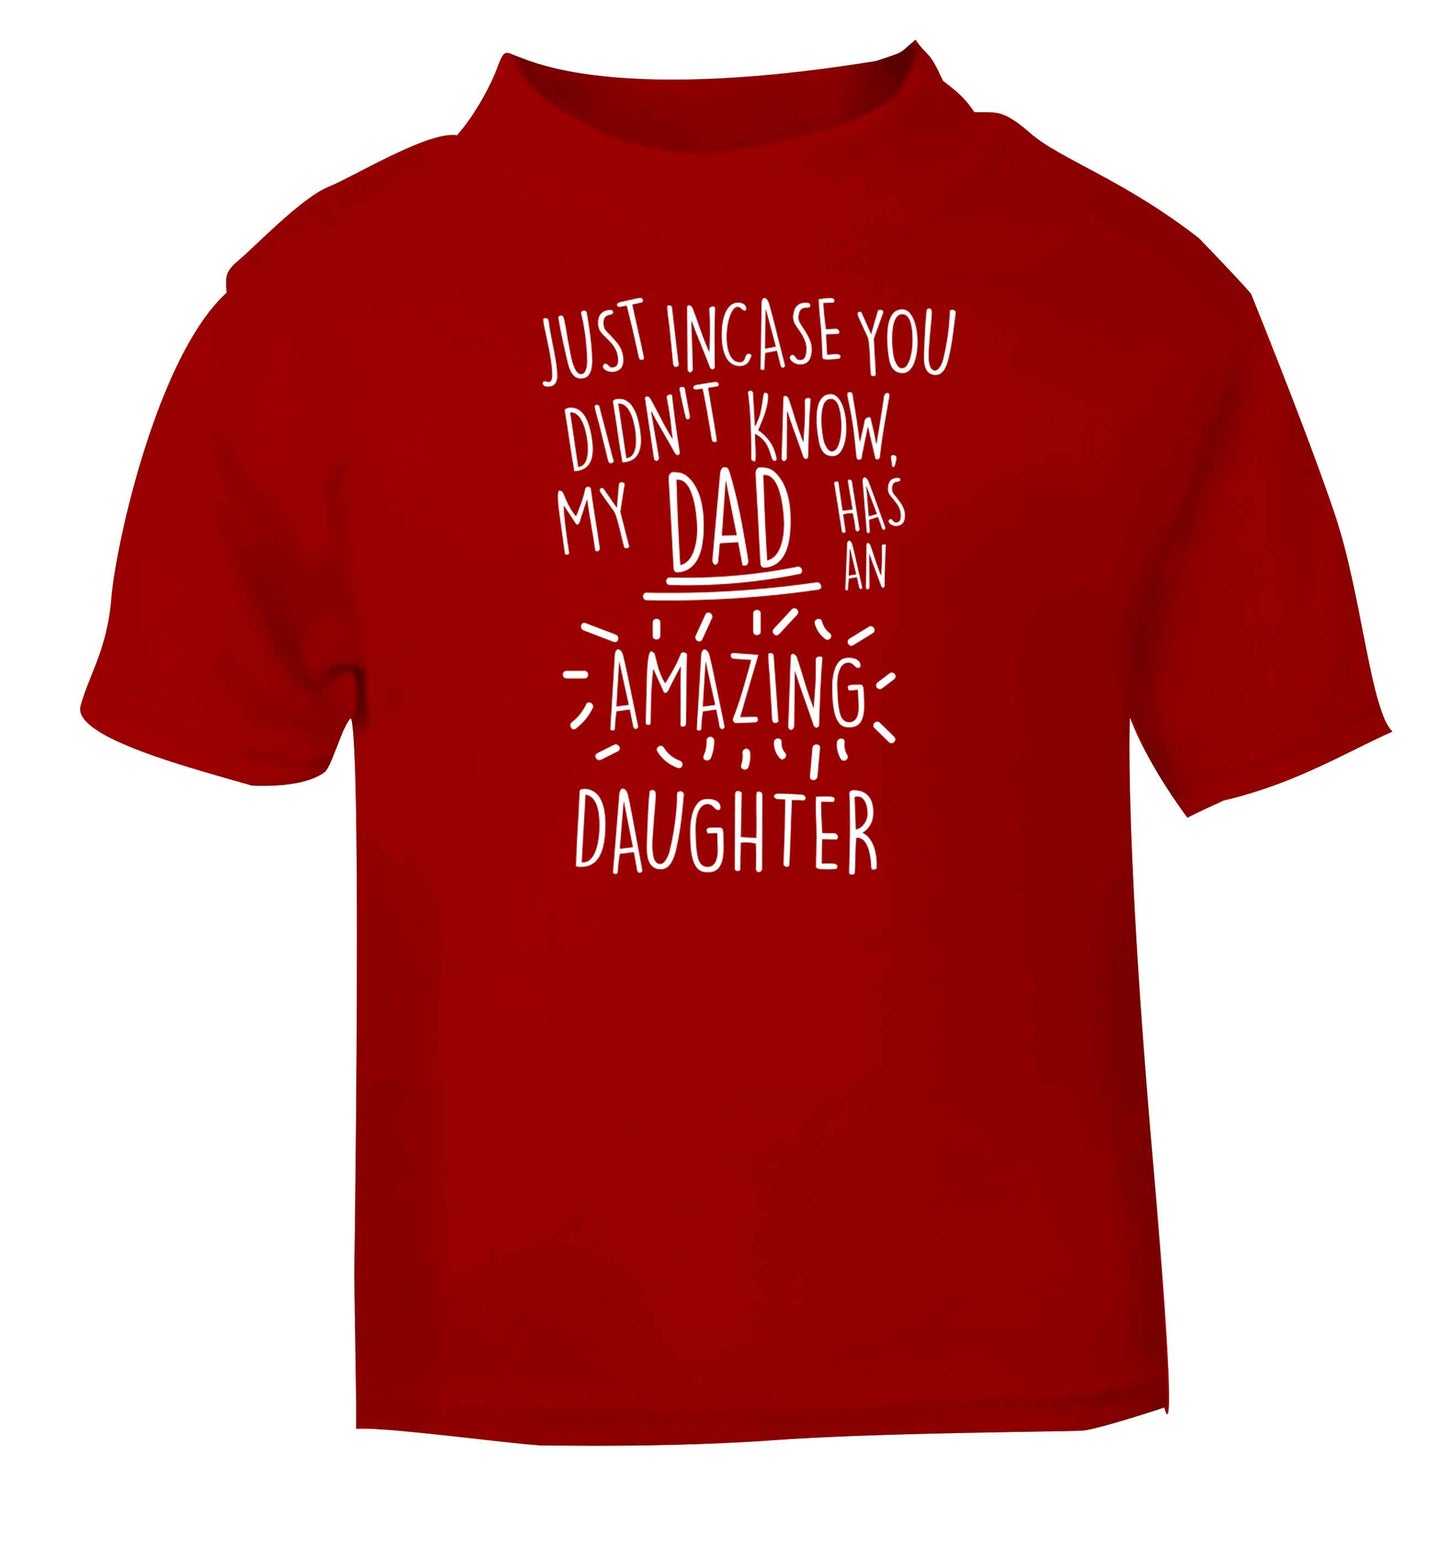 Just incase you didn't know my dad has an amazing daughter red baby toddler Tshirt 2 Years